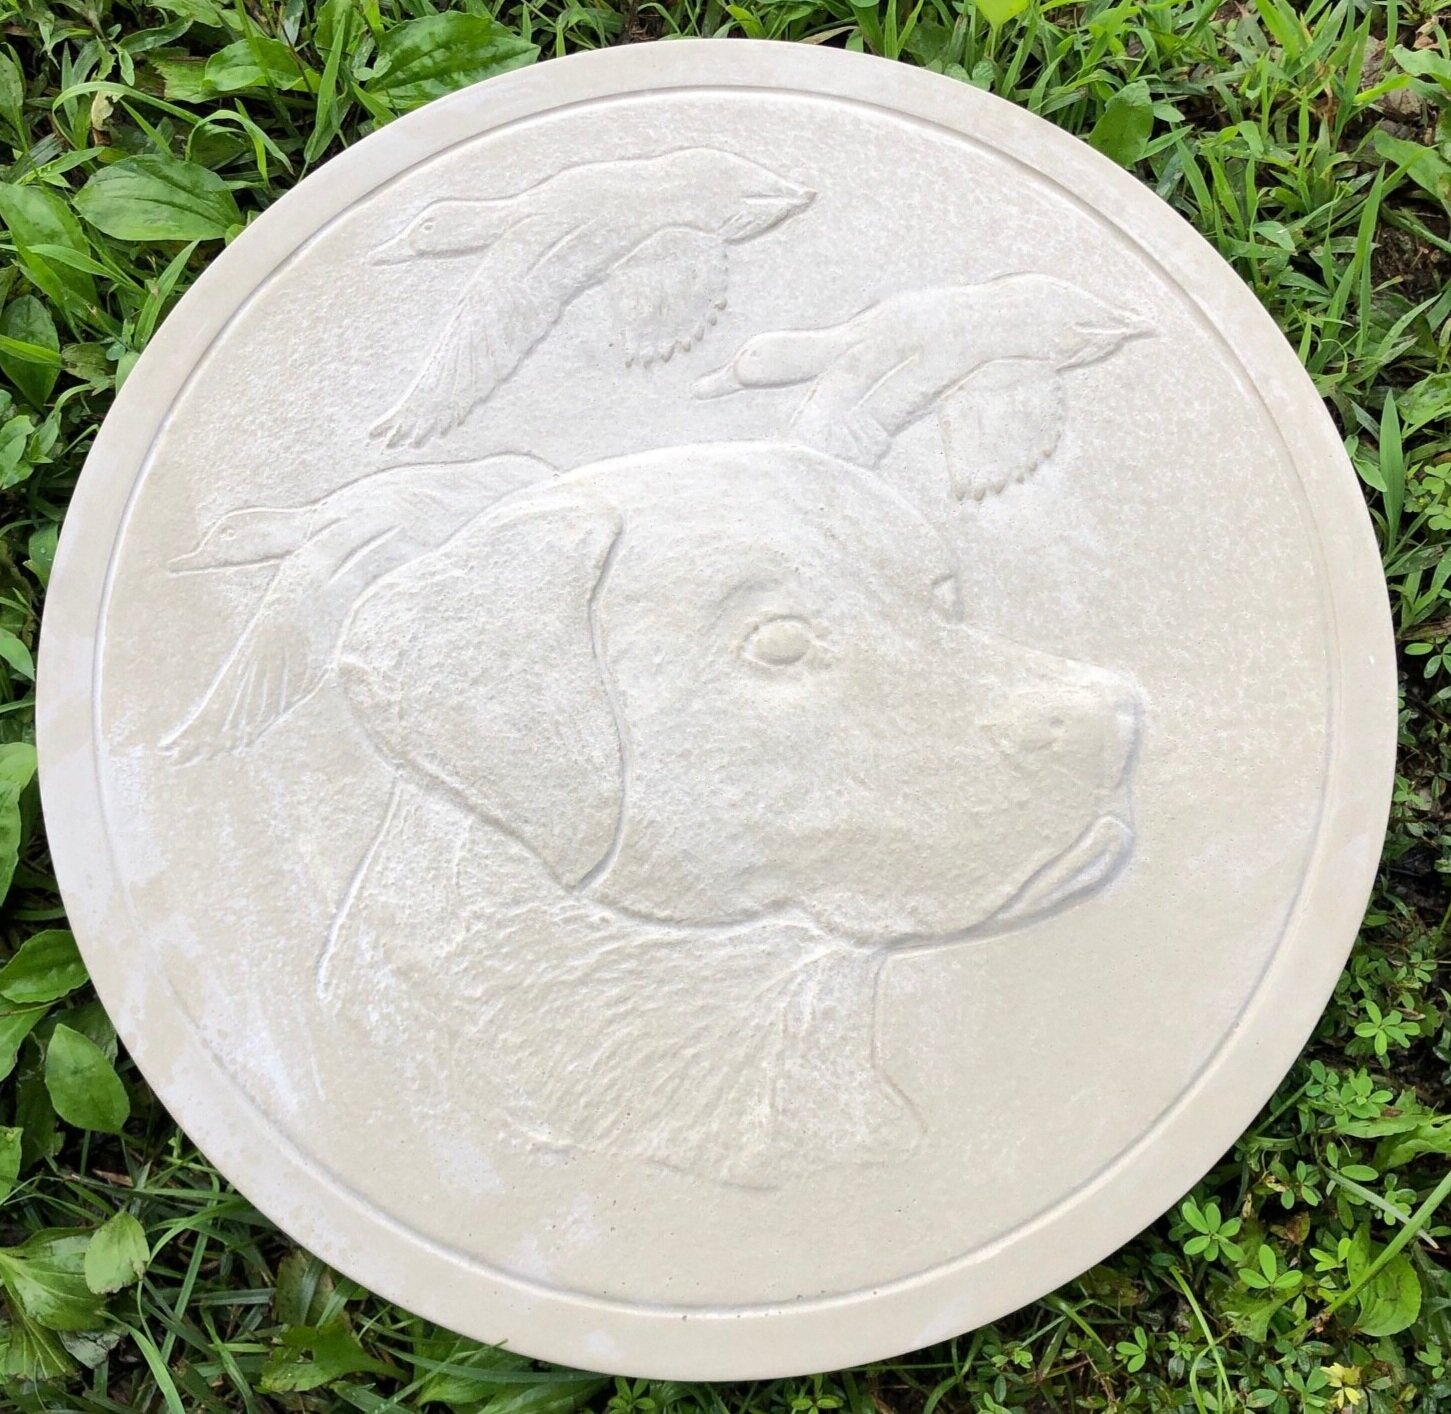 Poodle Dog Concrete or Plaster Stepping Stone Mold 1258 Moldcreations 